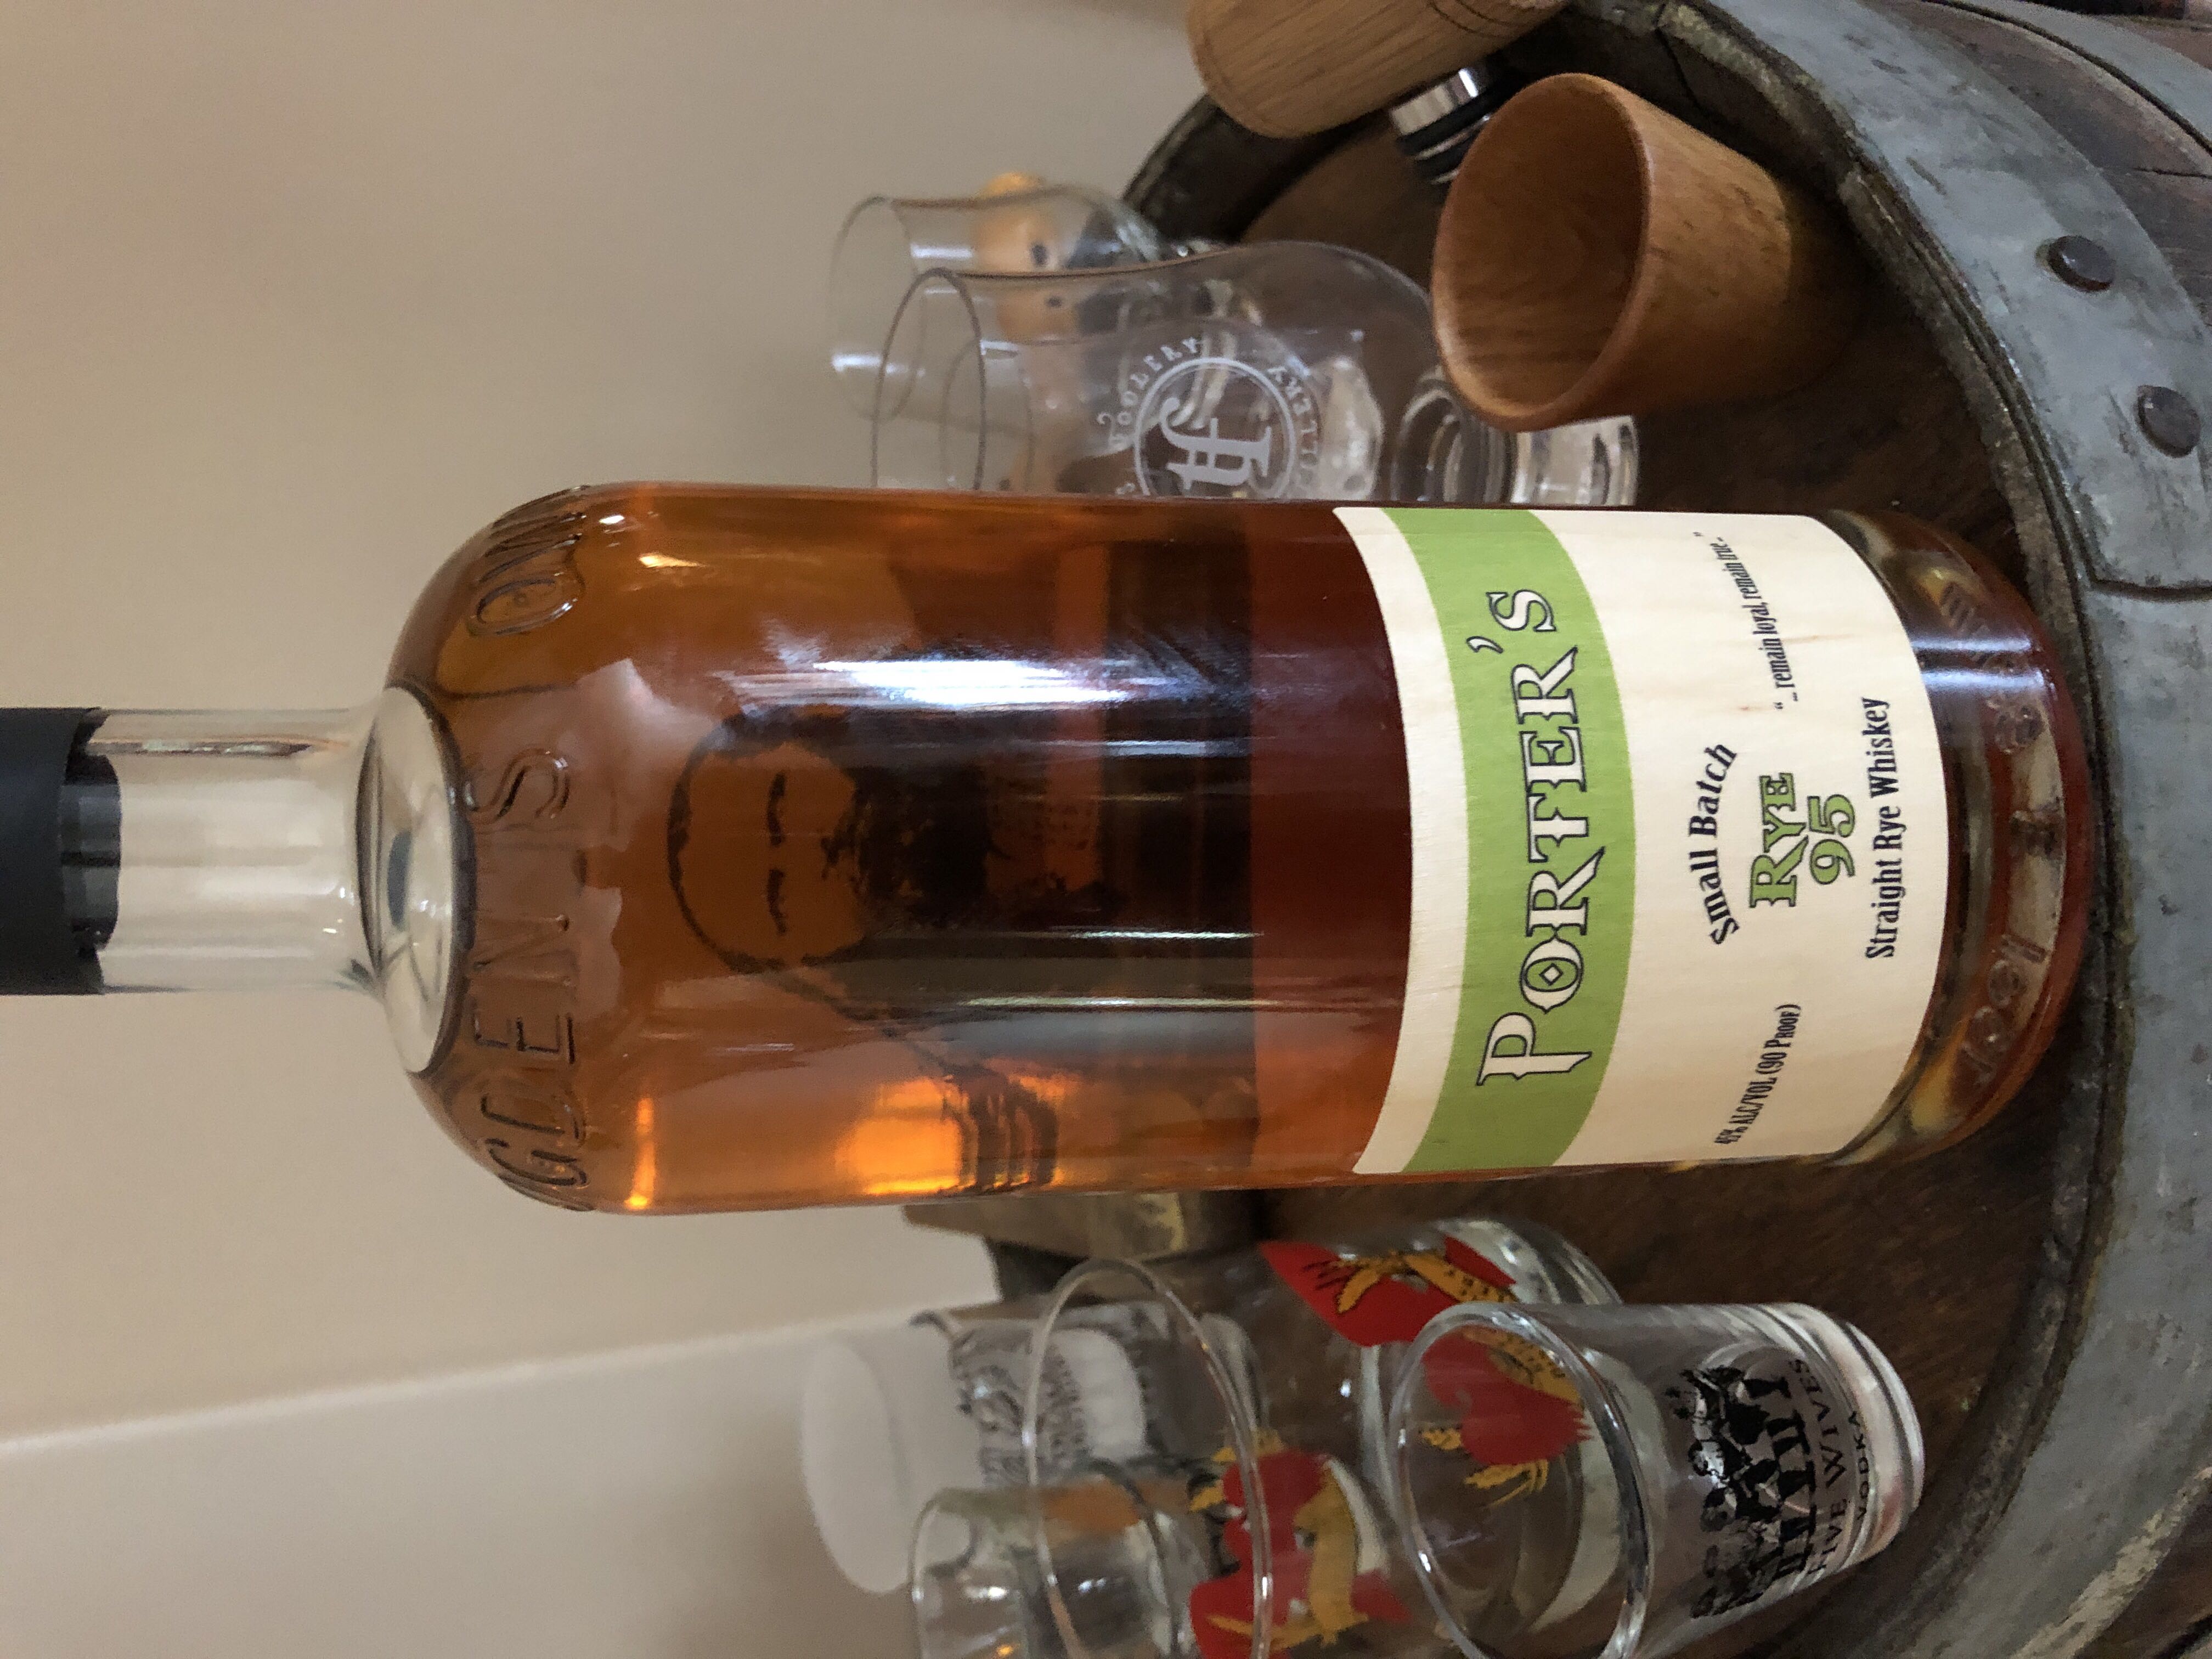 Ogdens Own Rye 95 - Ogdens Own Distillery (750 mL) alcohol collectible [Barcode 857519004292] - Main Image 1